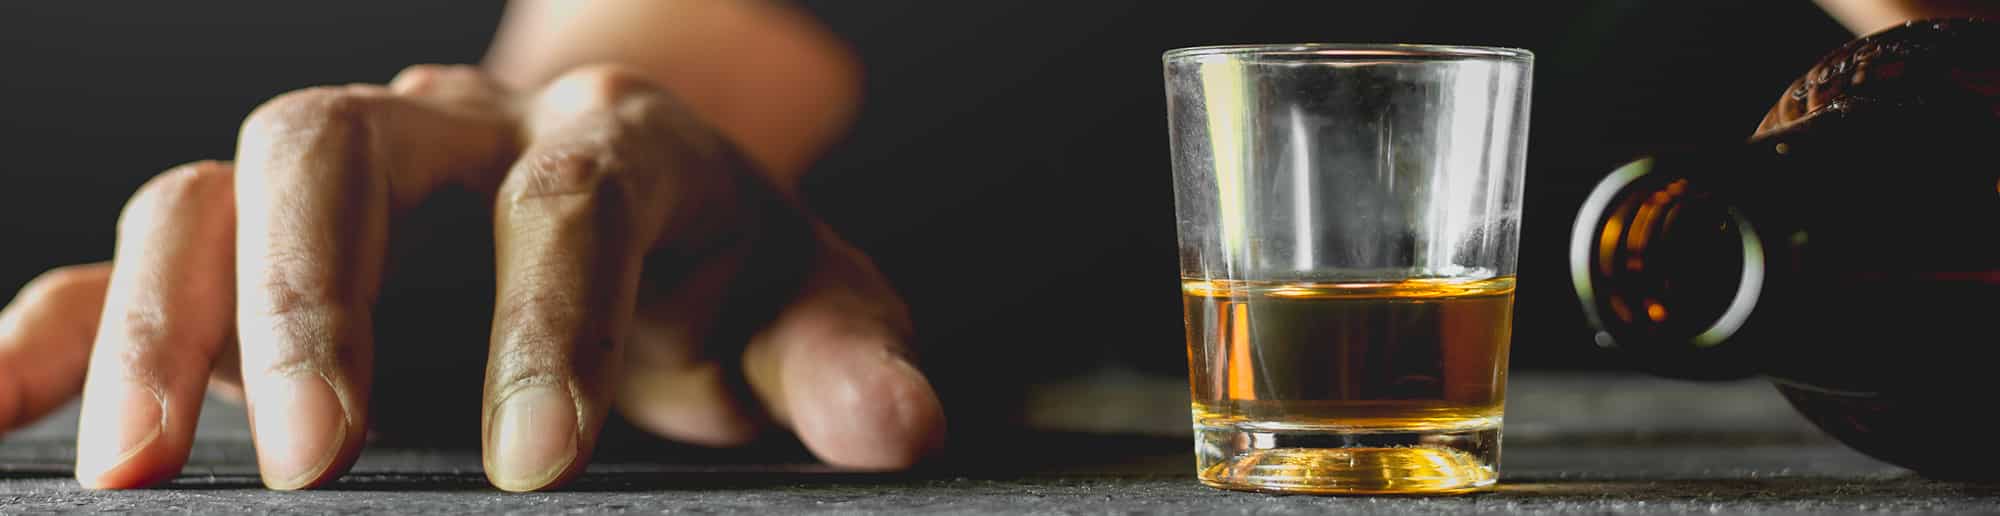 Hand rested near shot glass of whiskey with bottle lying next to it